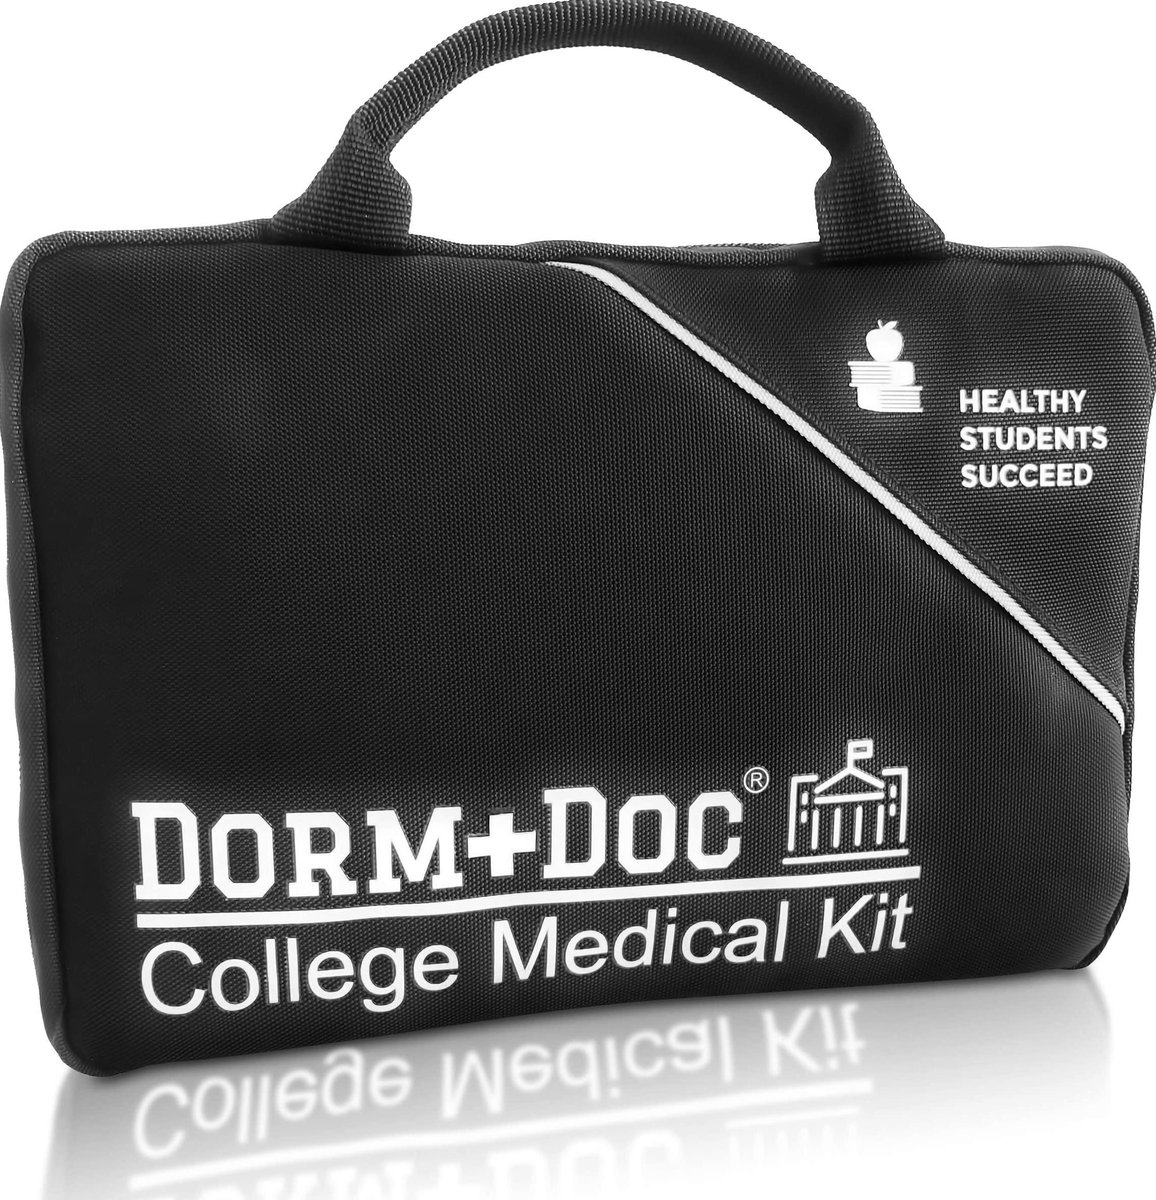 DormDoc 175 Piece Emergency First Aid Kit for College Students - Dorm Room Medical Kit with OTC Medicines and Bandages - Heal YPTOXC7

amazon.com/dp/B01E53NB9O?…